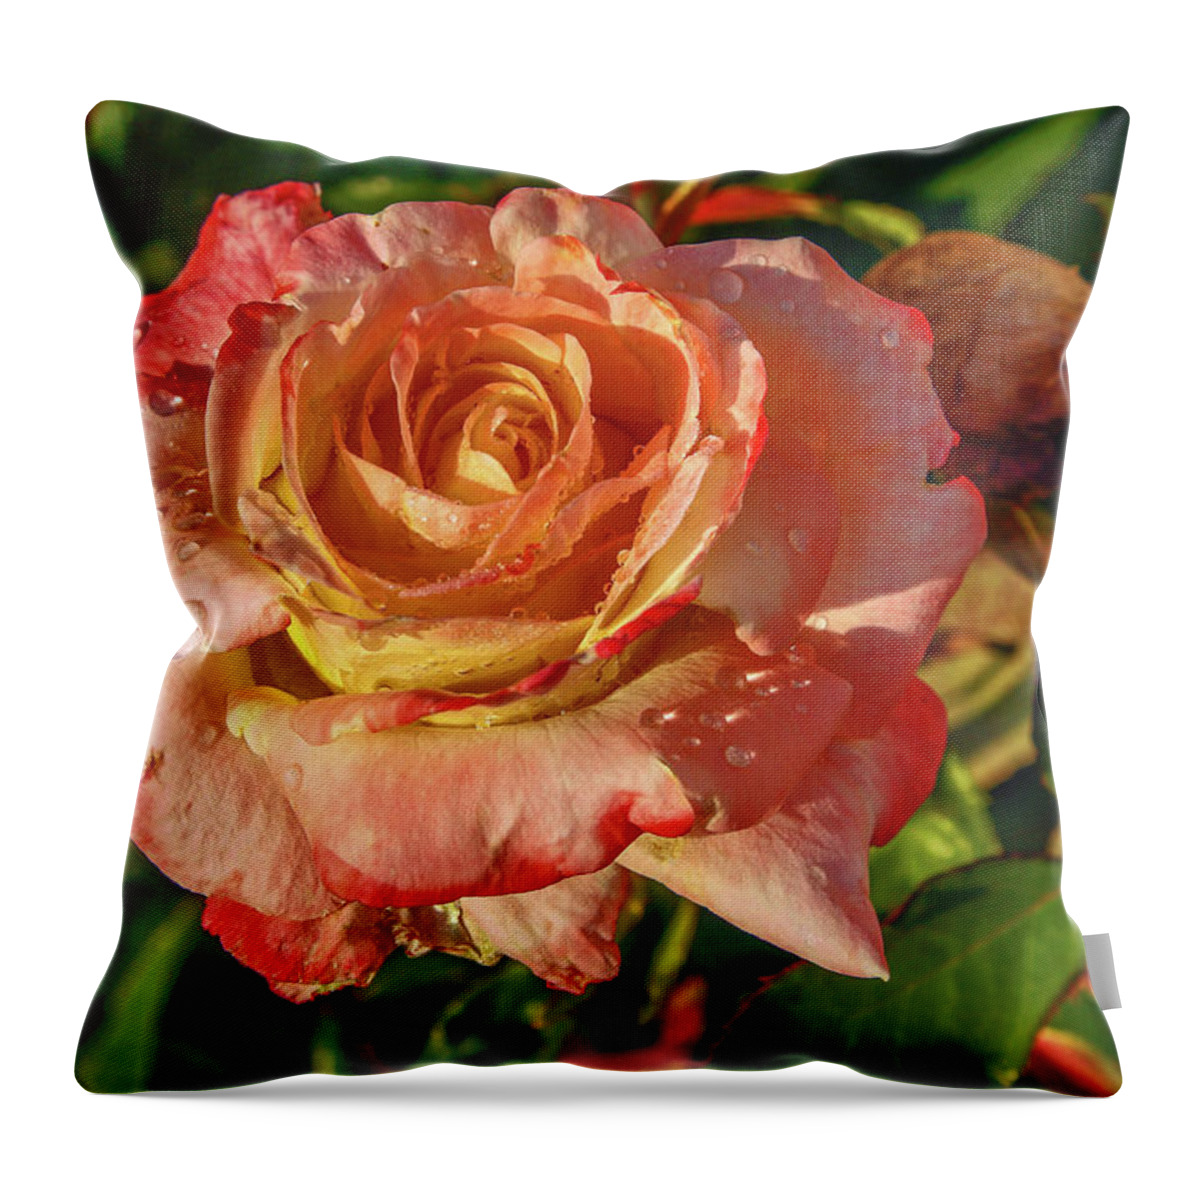 Pink With Yellow Rose Throw Pillow featuring the photograph Dewey Rose by Sally Weigand